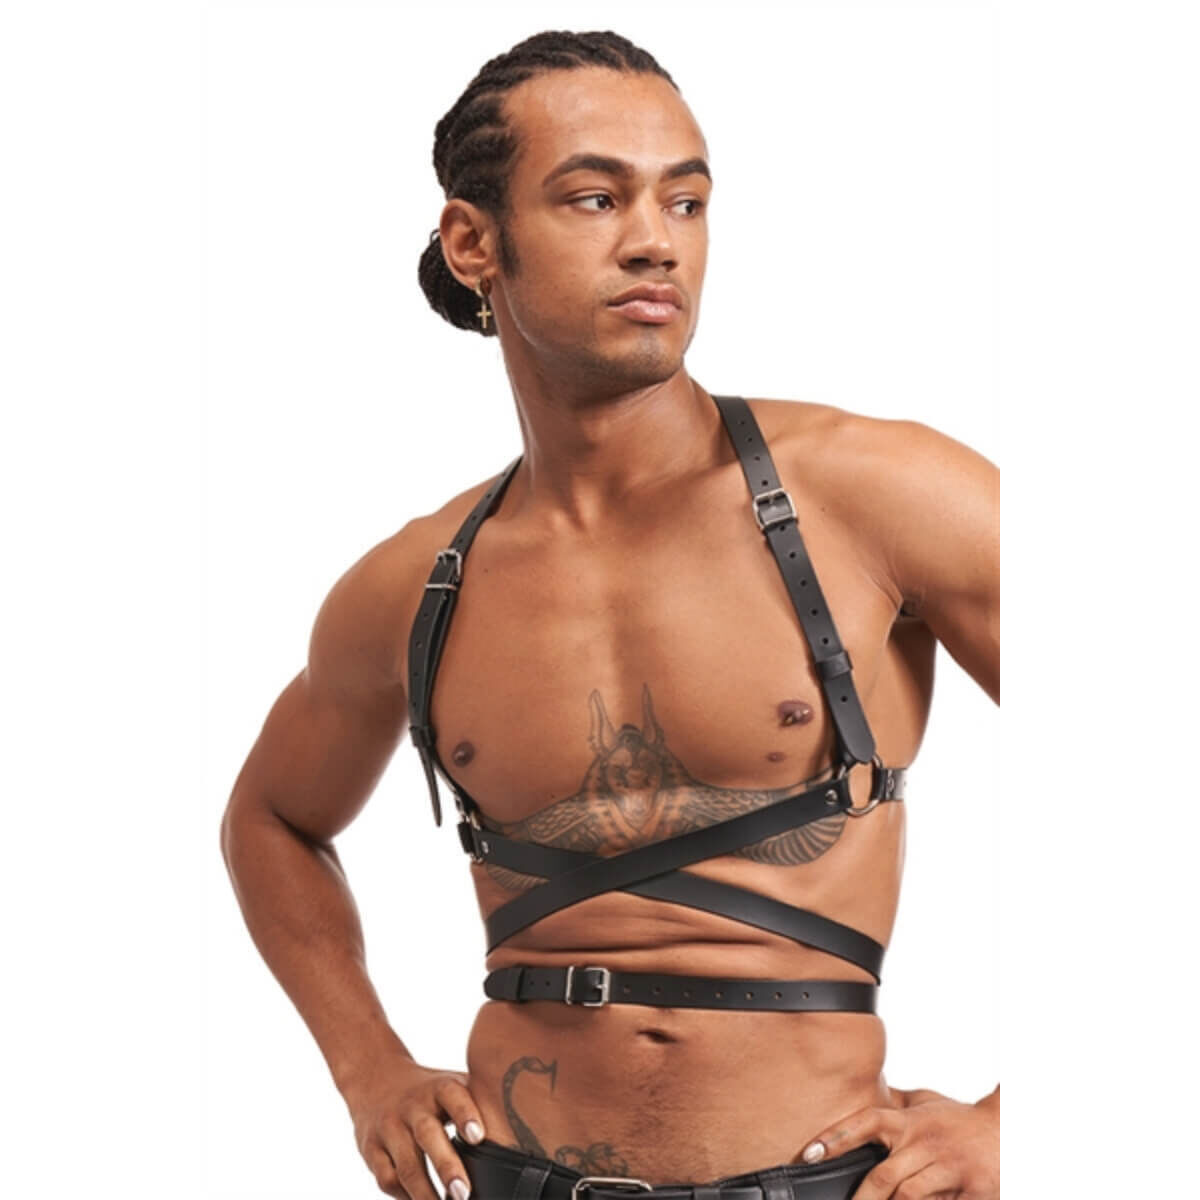 https://tomrockets.cstatic.io/media/image/d4/c6/61/Mister-B-Leather-Icon-Harness-Black-Gay-Online-Fashion-Harness-Erotic-Sex-Shop-Store-2_10616.jpg